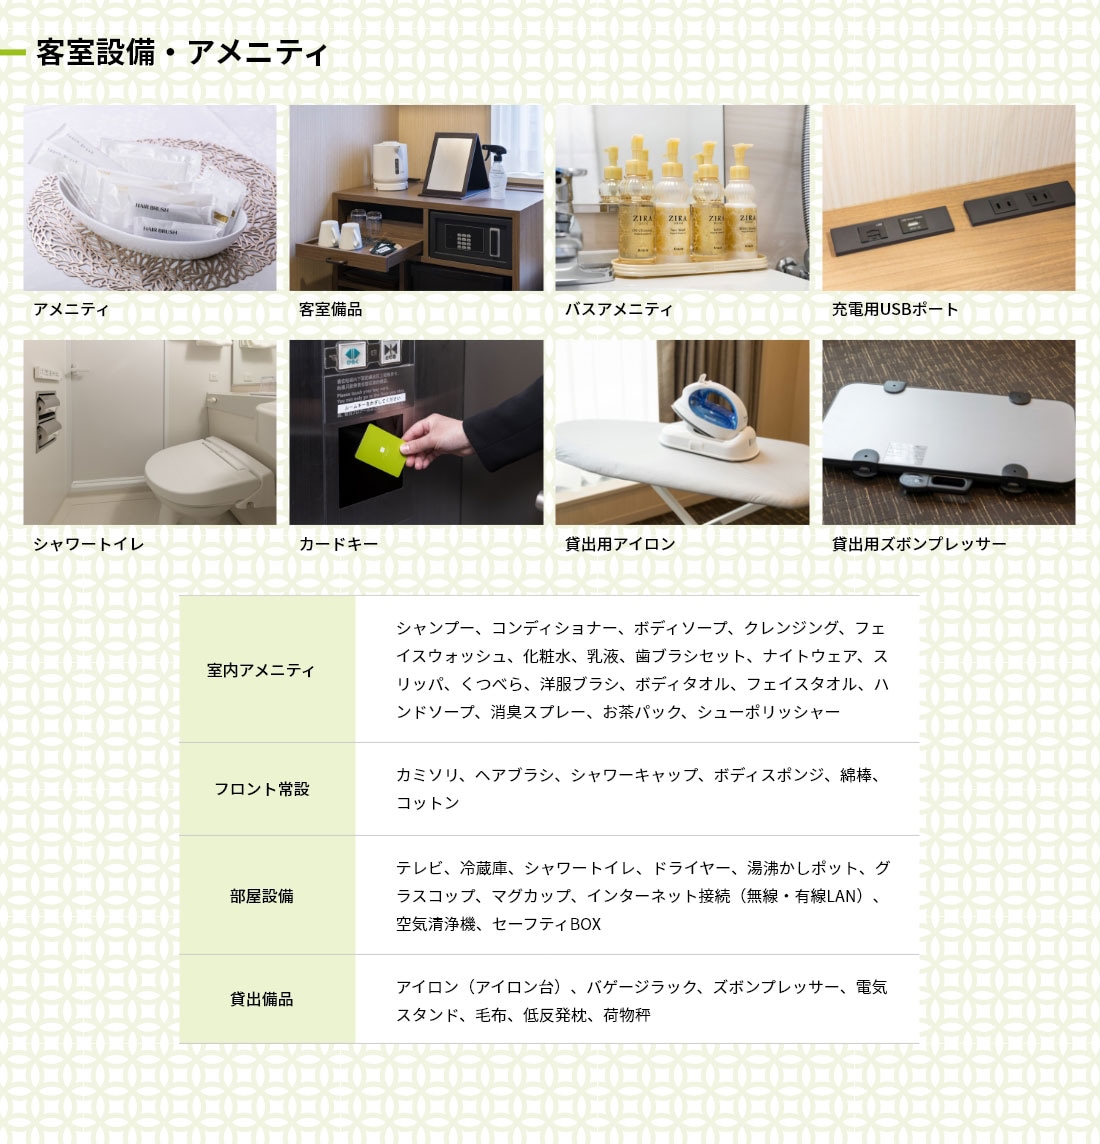 Hotel information and reservations for Ginza Capital Hotel Moegi